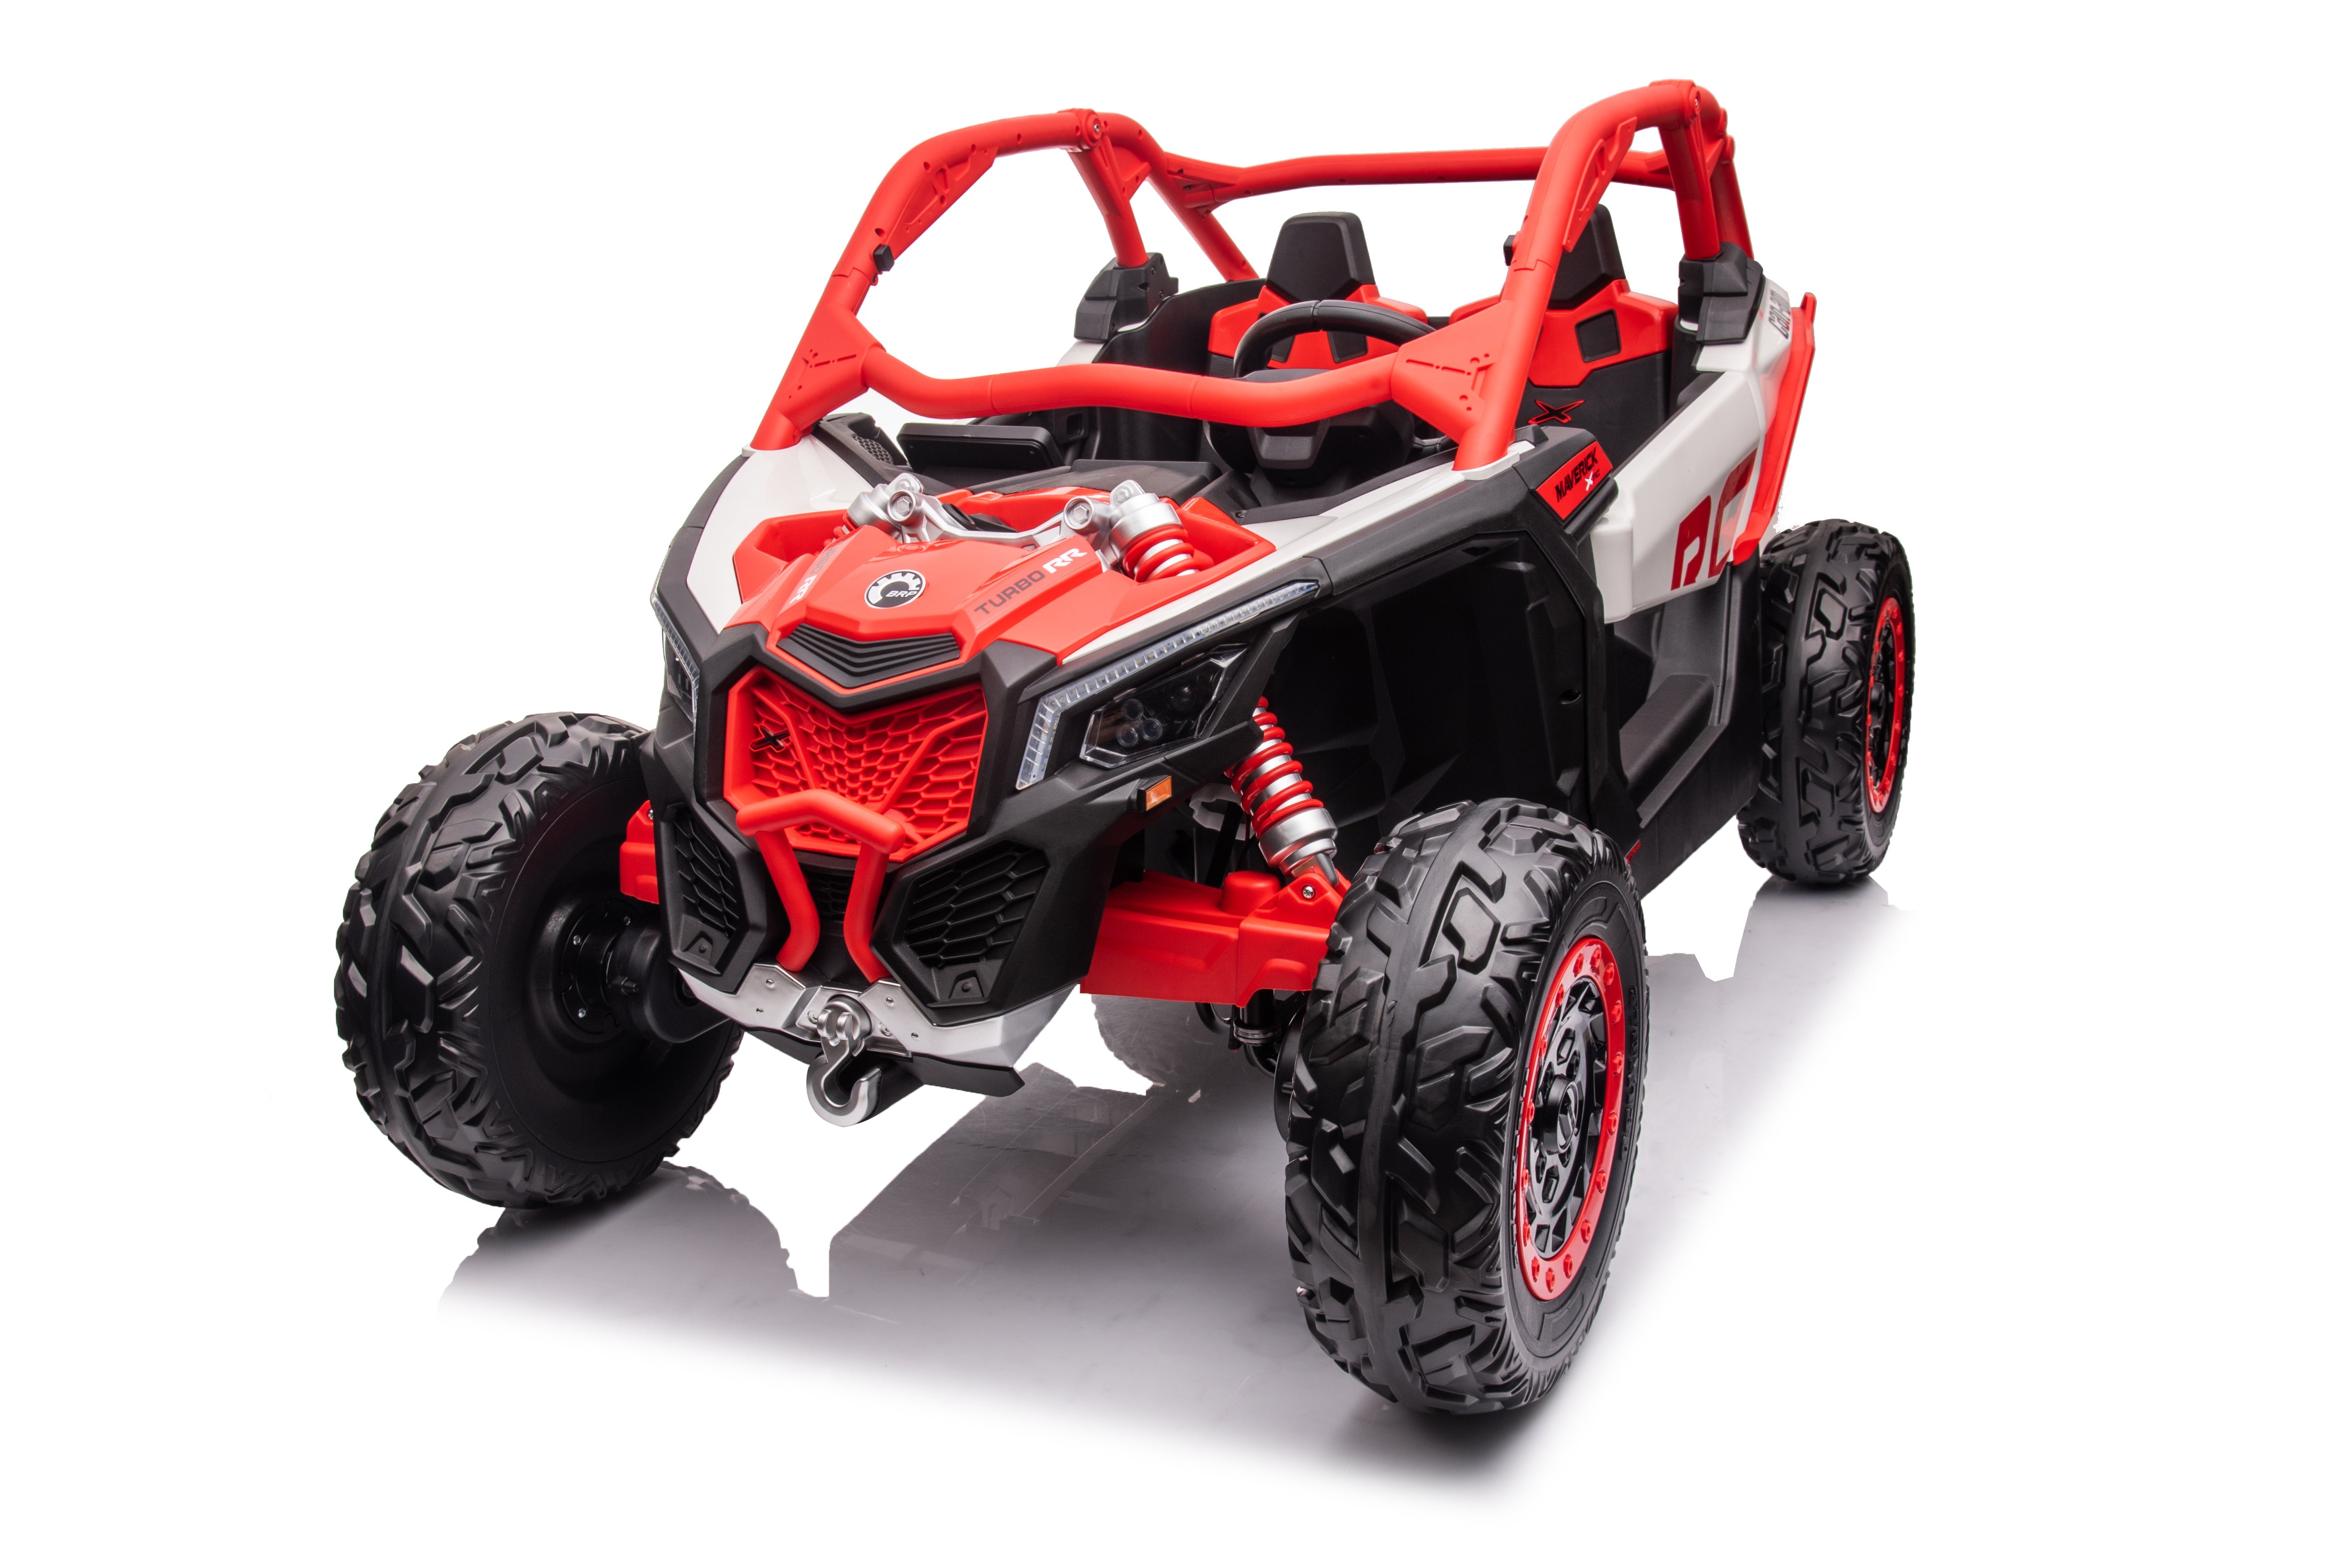 2023 Can-am Maverick Car | 2 Seater > 24V (2x2) | Electric Riding Vehicle for Kids